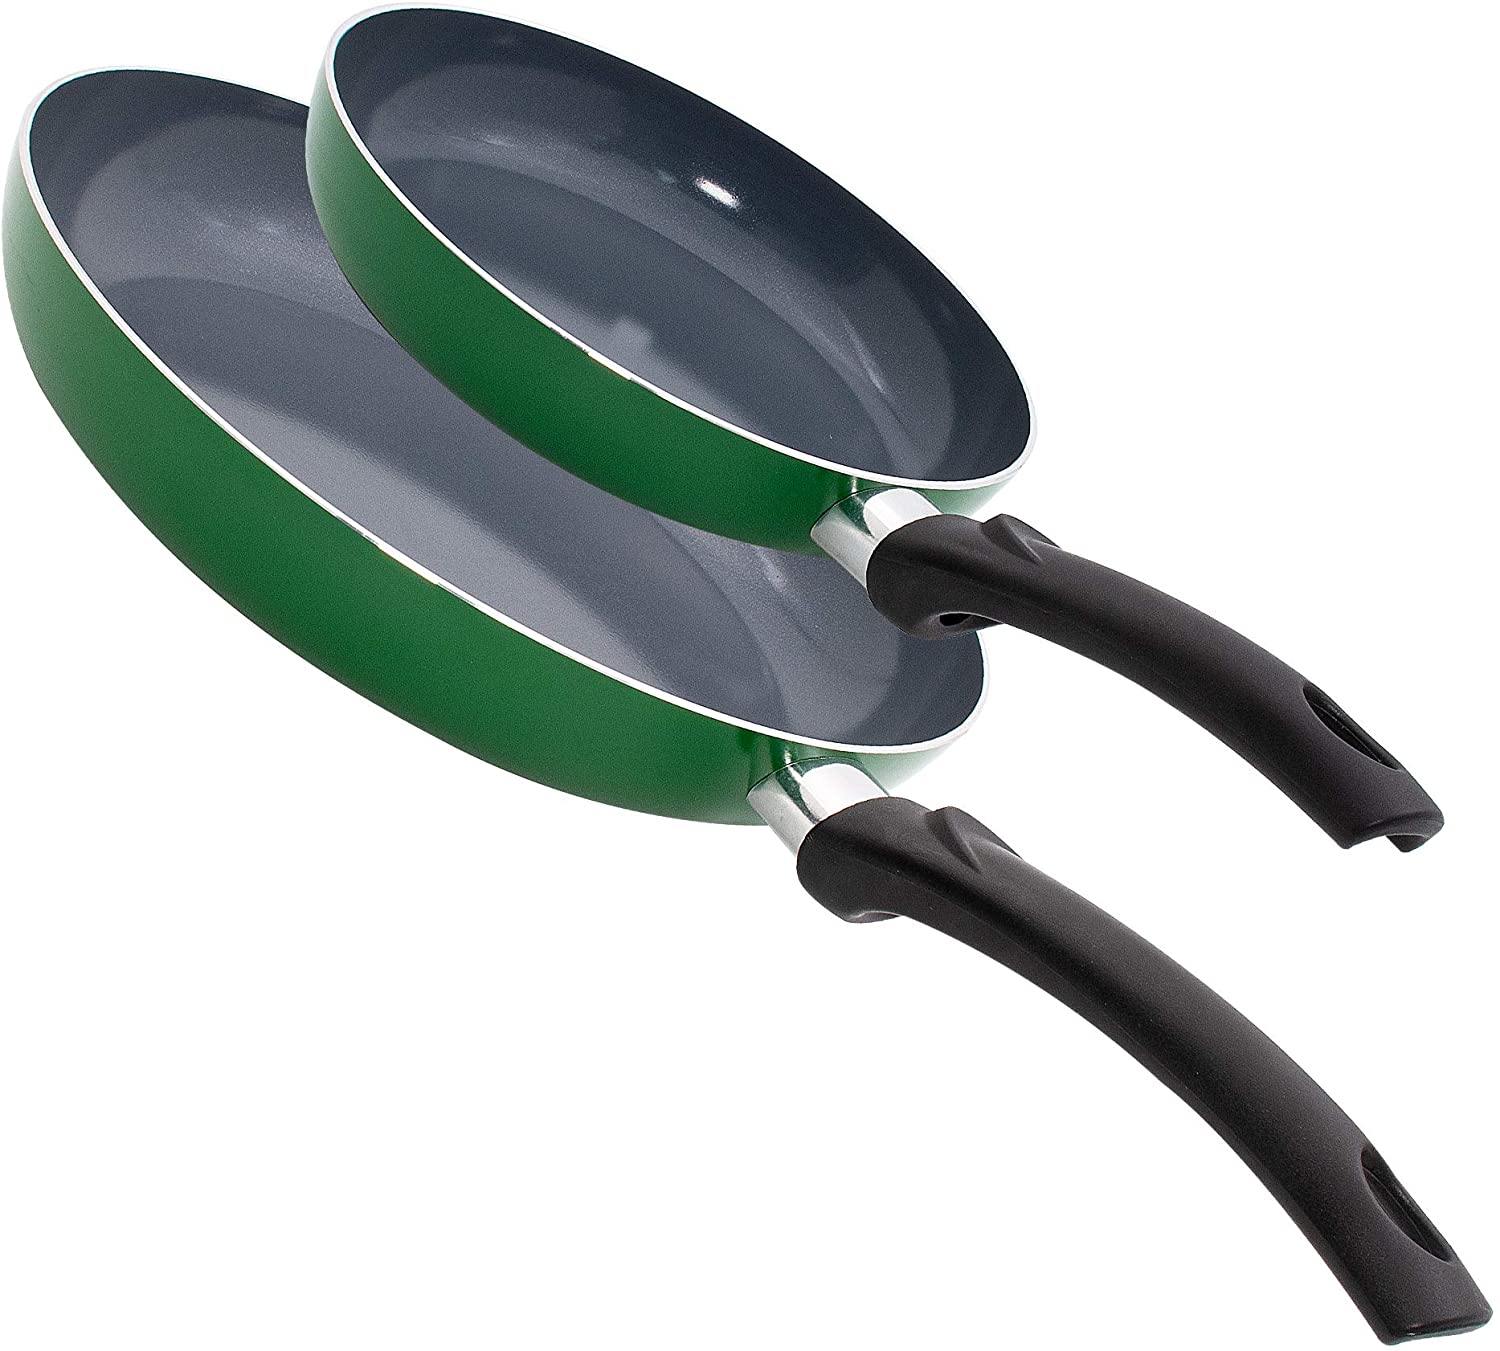 Ailwyn 11 Nonstick Sauté Pan with Lid – Nonstick Frying Pan, All-In-One  Pan, Deep Frying Pan, Wok Pan with Lid, Oven Safe & Dishwasher Safe